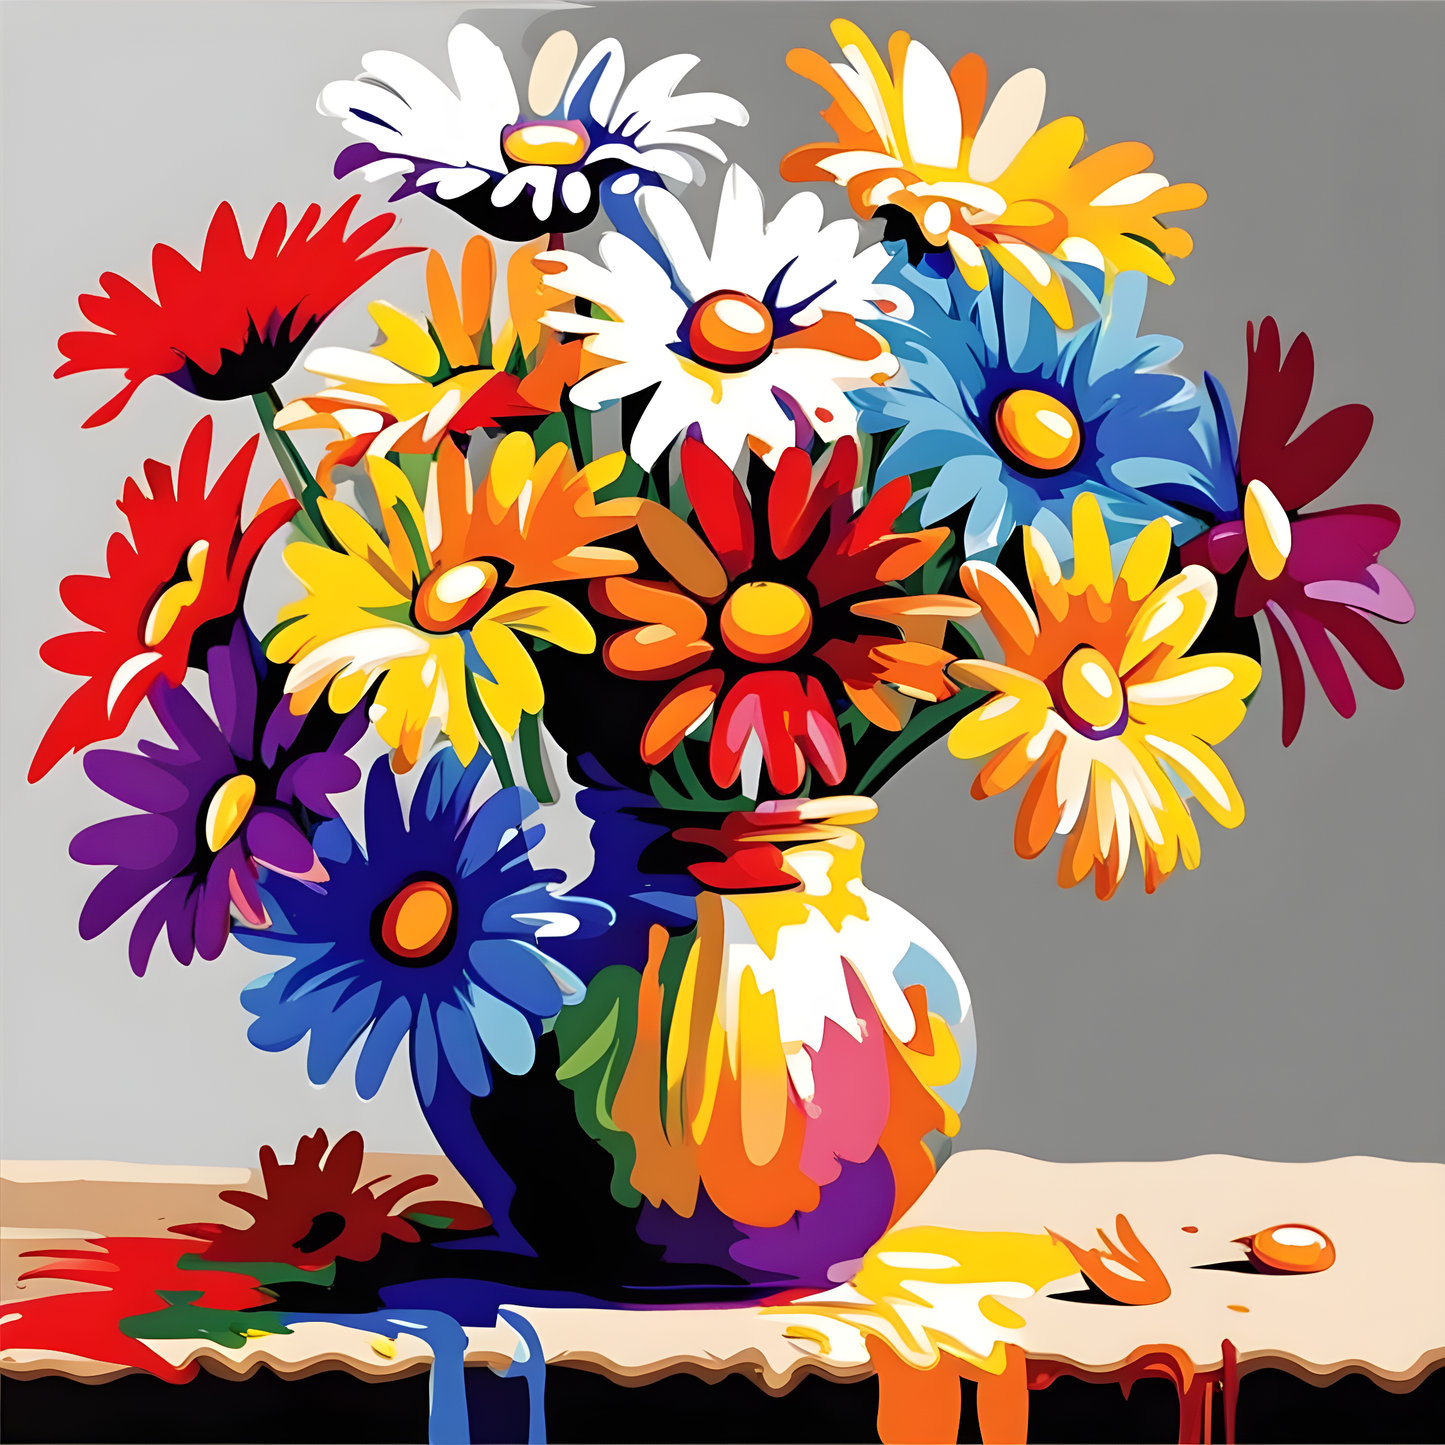 Colorful Daisies in a Vase - Van-Go Paint-By-Number Kit